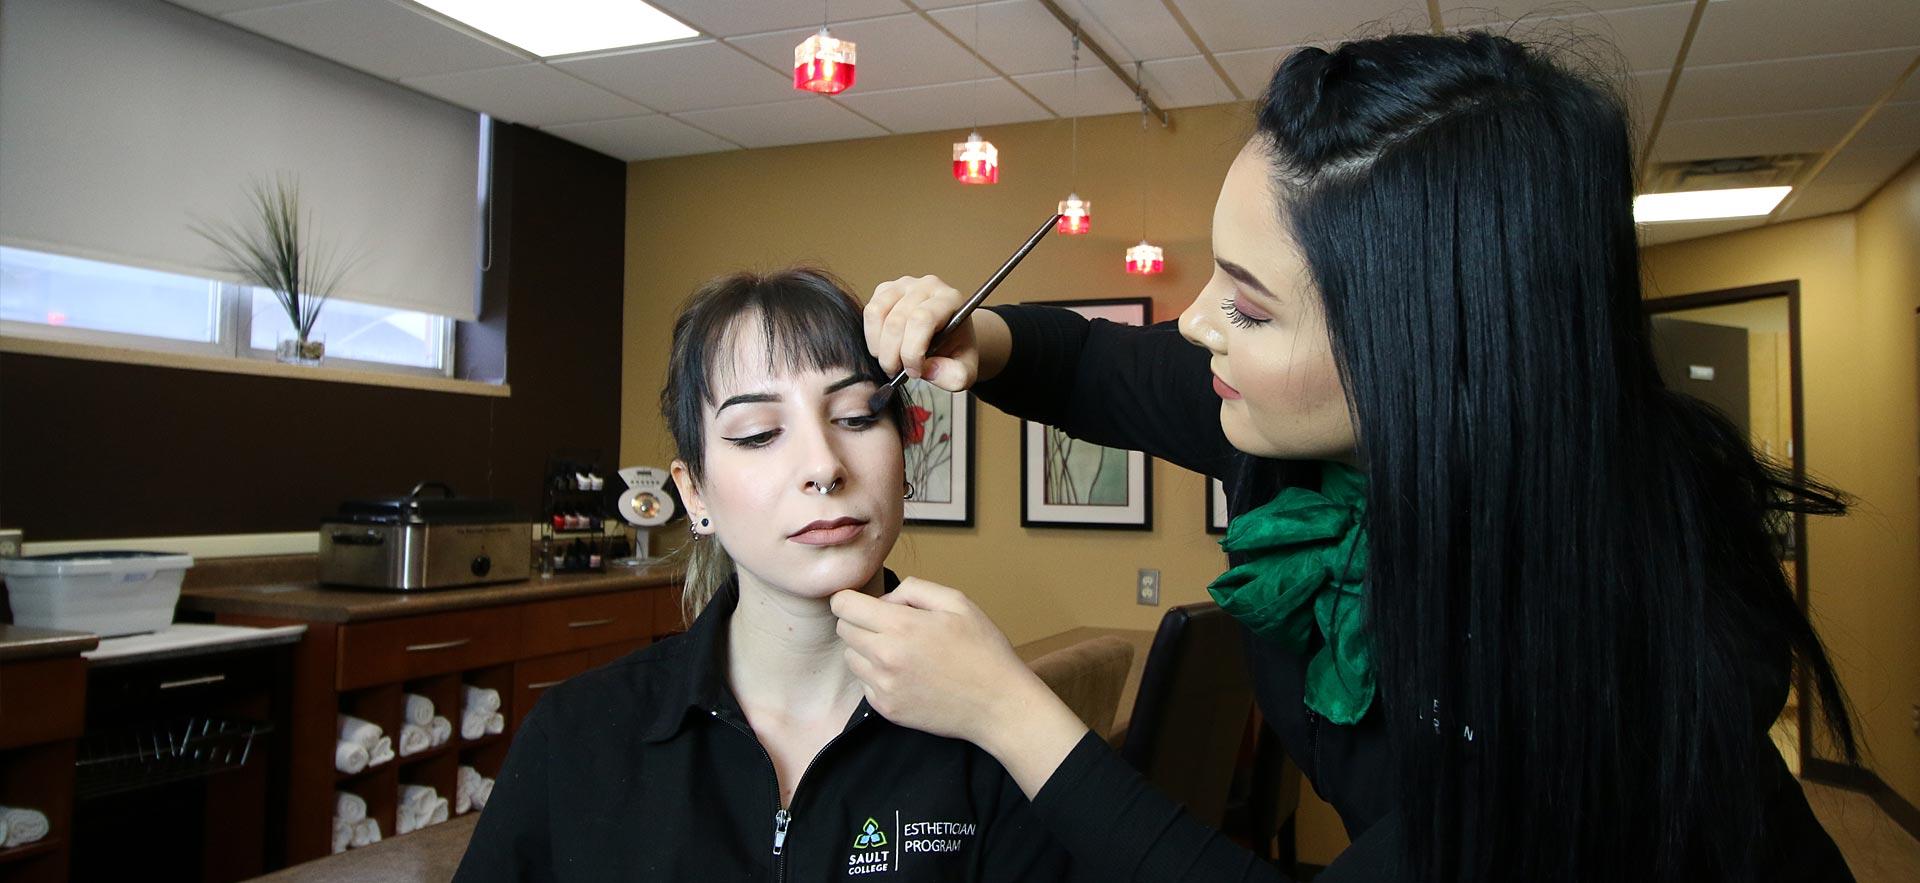 One female Esthetician student applies make-up to another Esthetician student in the о salon spa. 